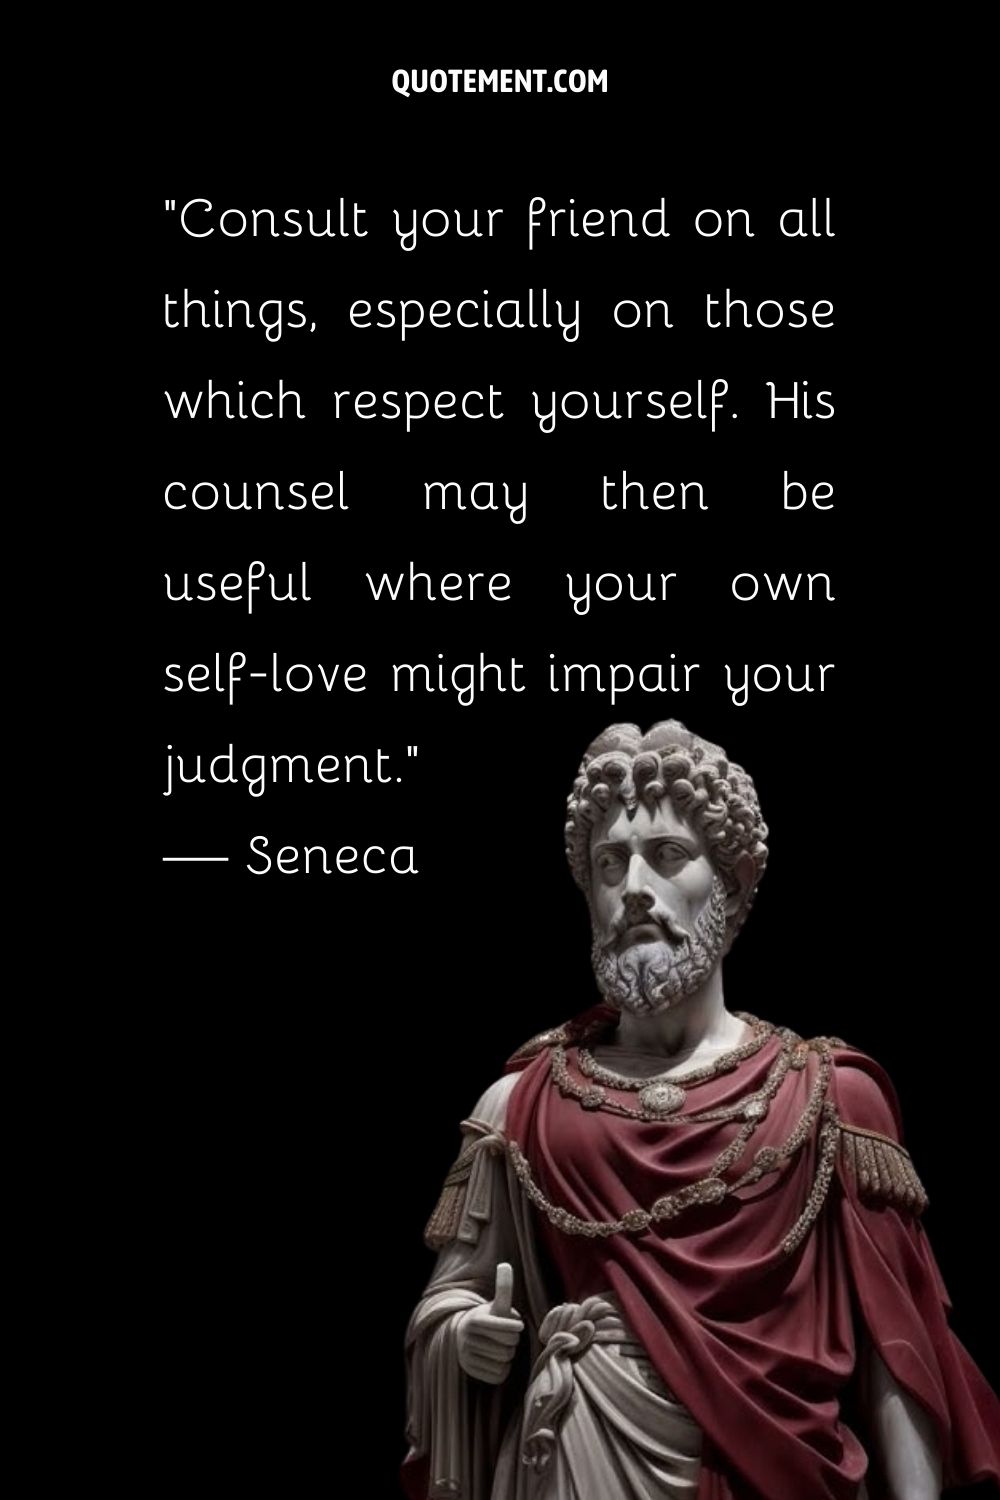 “Consult your friend on all things, especially on those which respect yourself. His counsel may then be useful where your own self-love might impair your judgment.” — Seneca